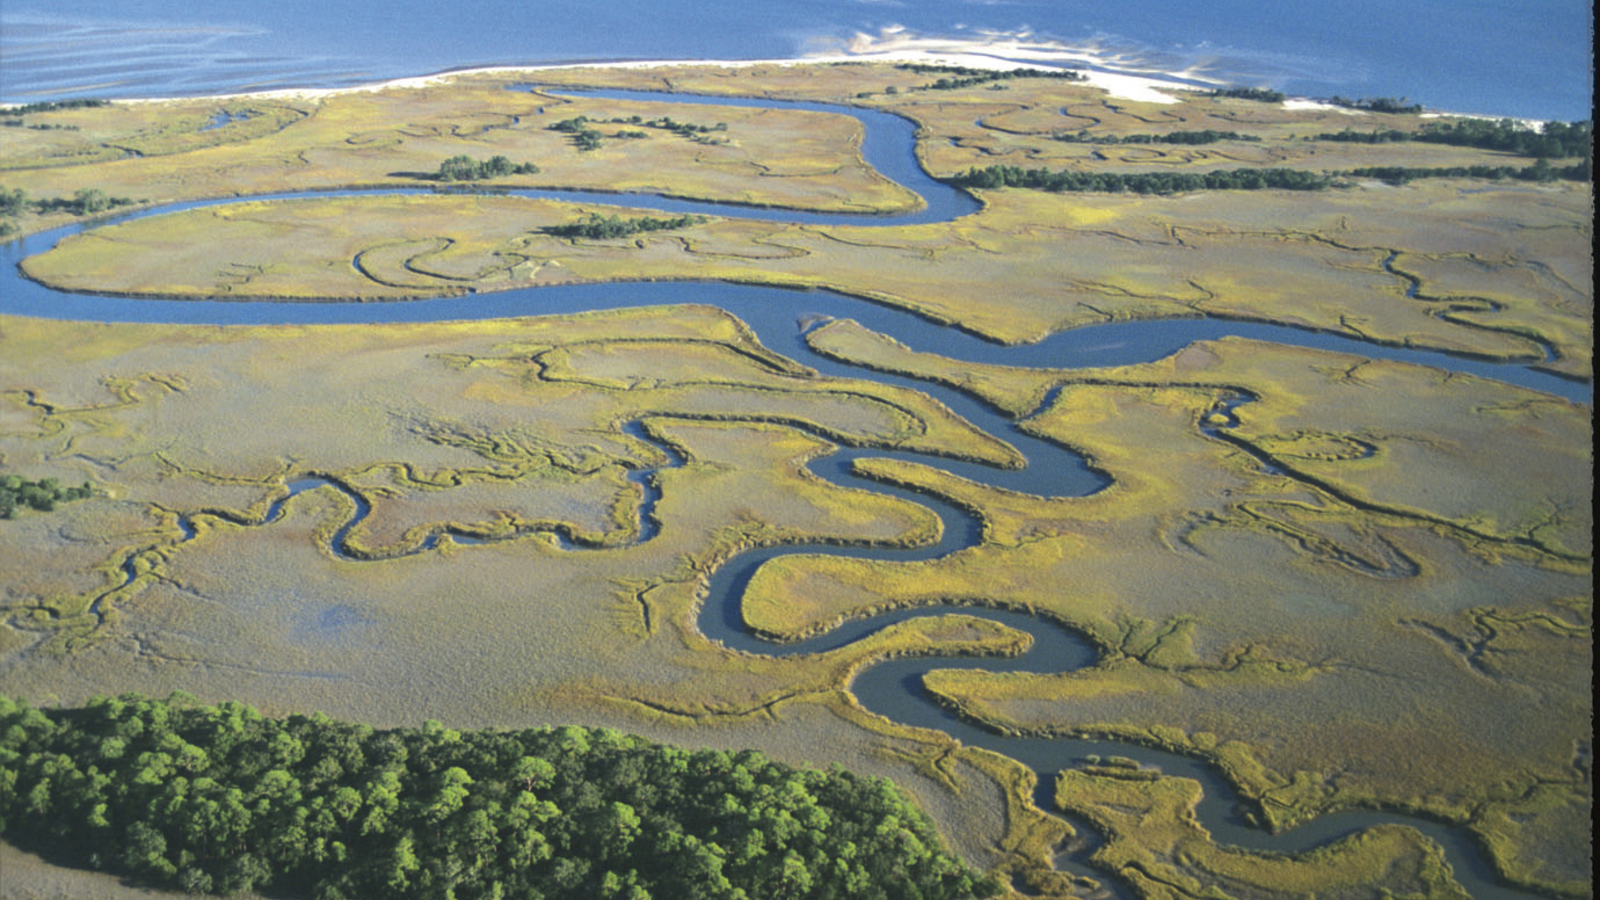 Aerial view of twisting streams on Otter Island. This is an example of a coastal wetland area, which supports a large amount of fish species and helps shelter coastal communities from storms- South Carolina has the largest amount of salt marsh area in the East Coast. Photo © Tom Blagden